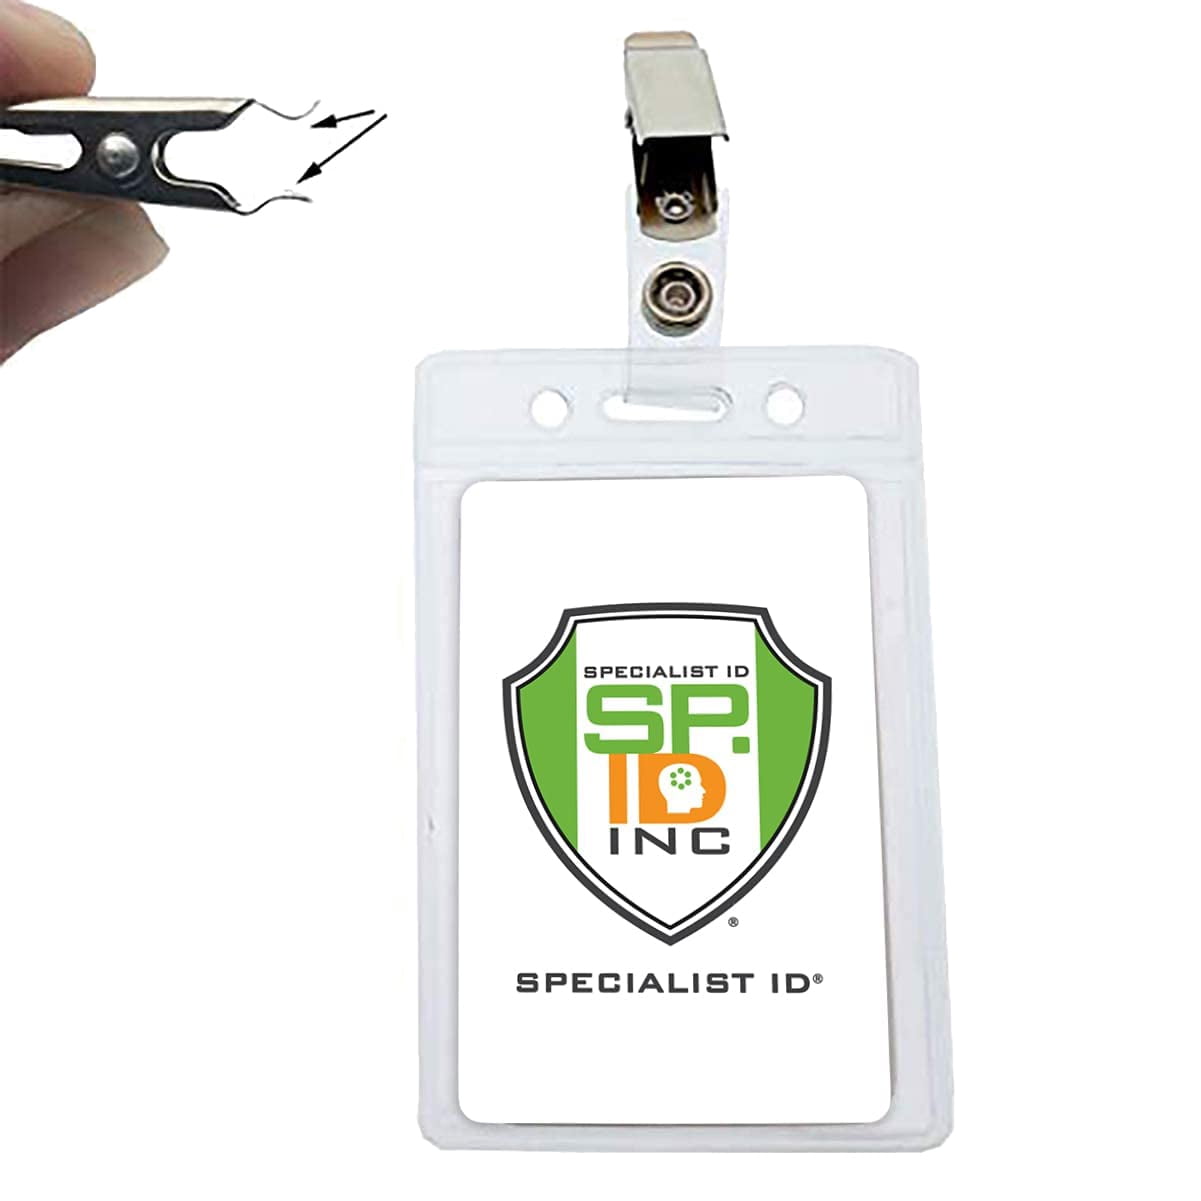 10 Pack Vertical Name Tag Badge Holders with Snag Free Clips by Specialist ID 